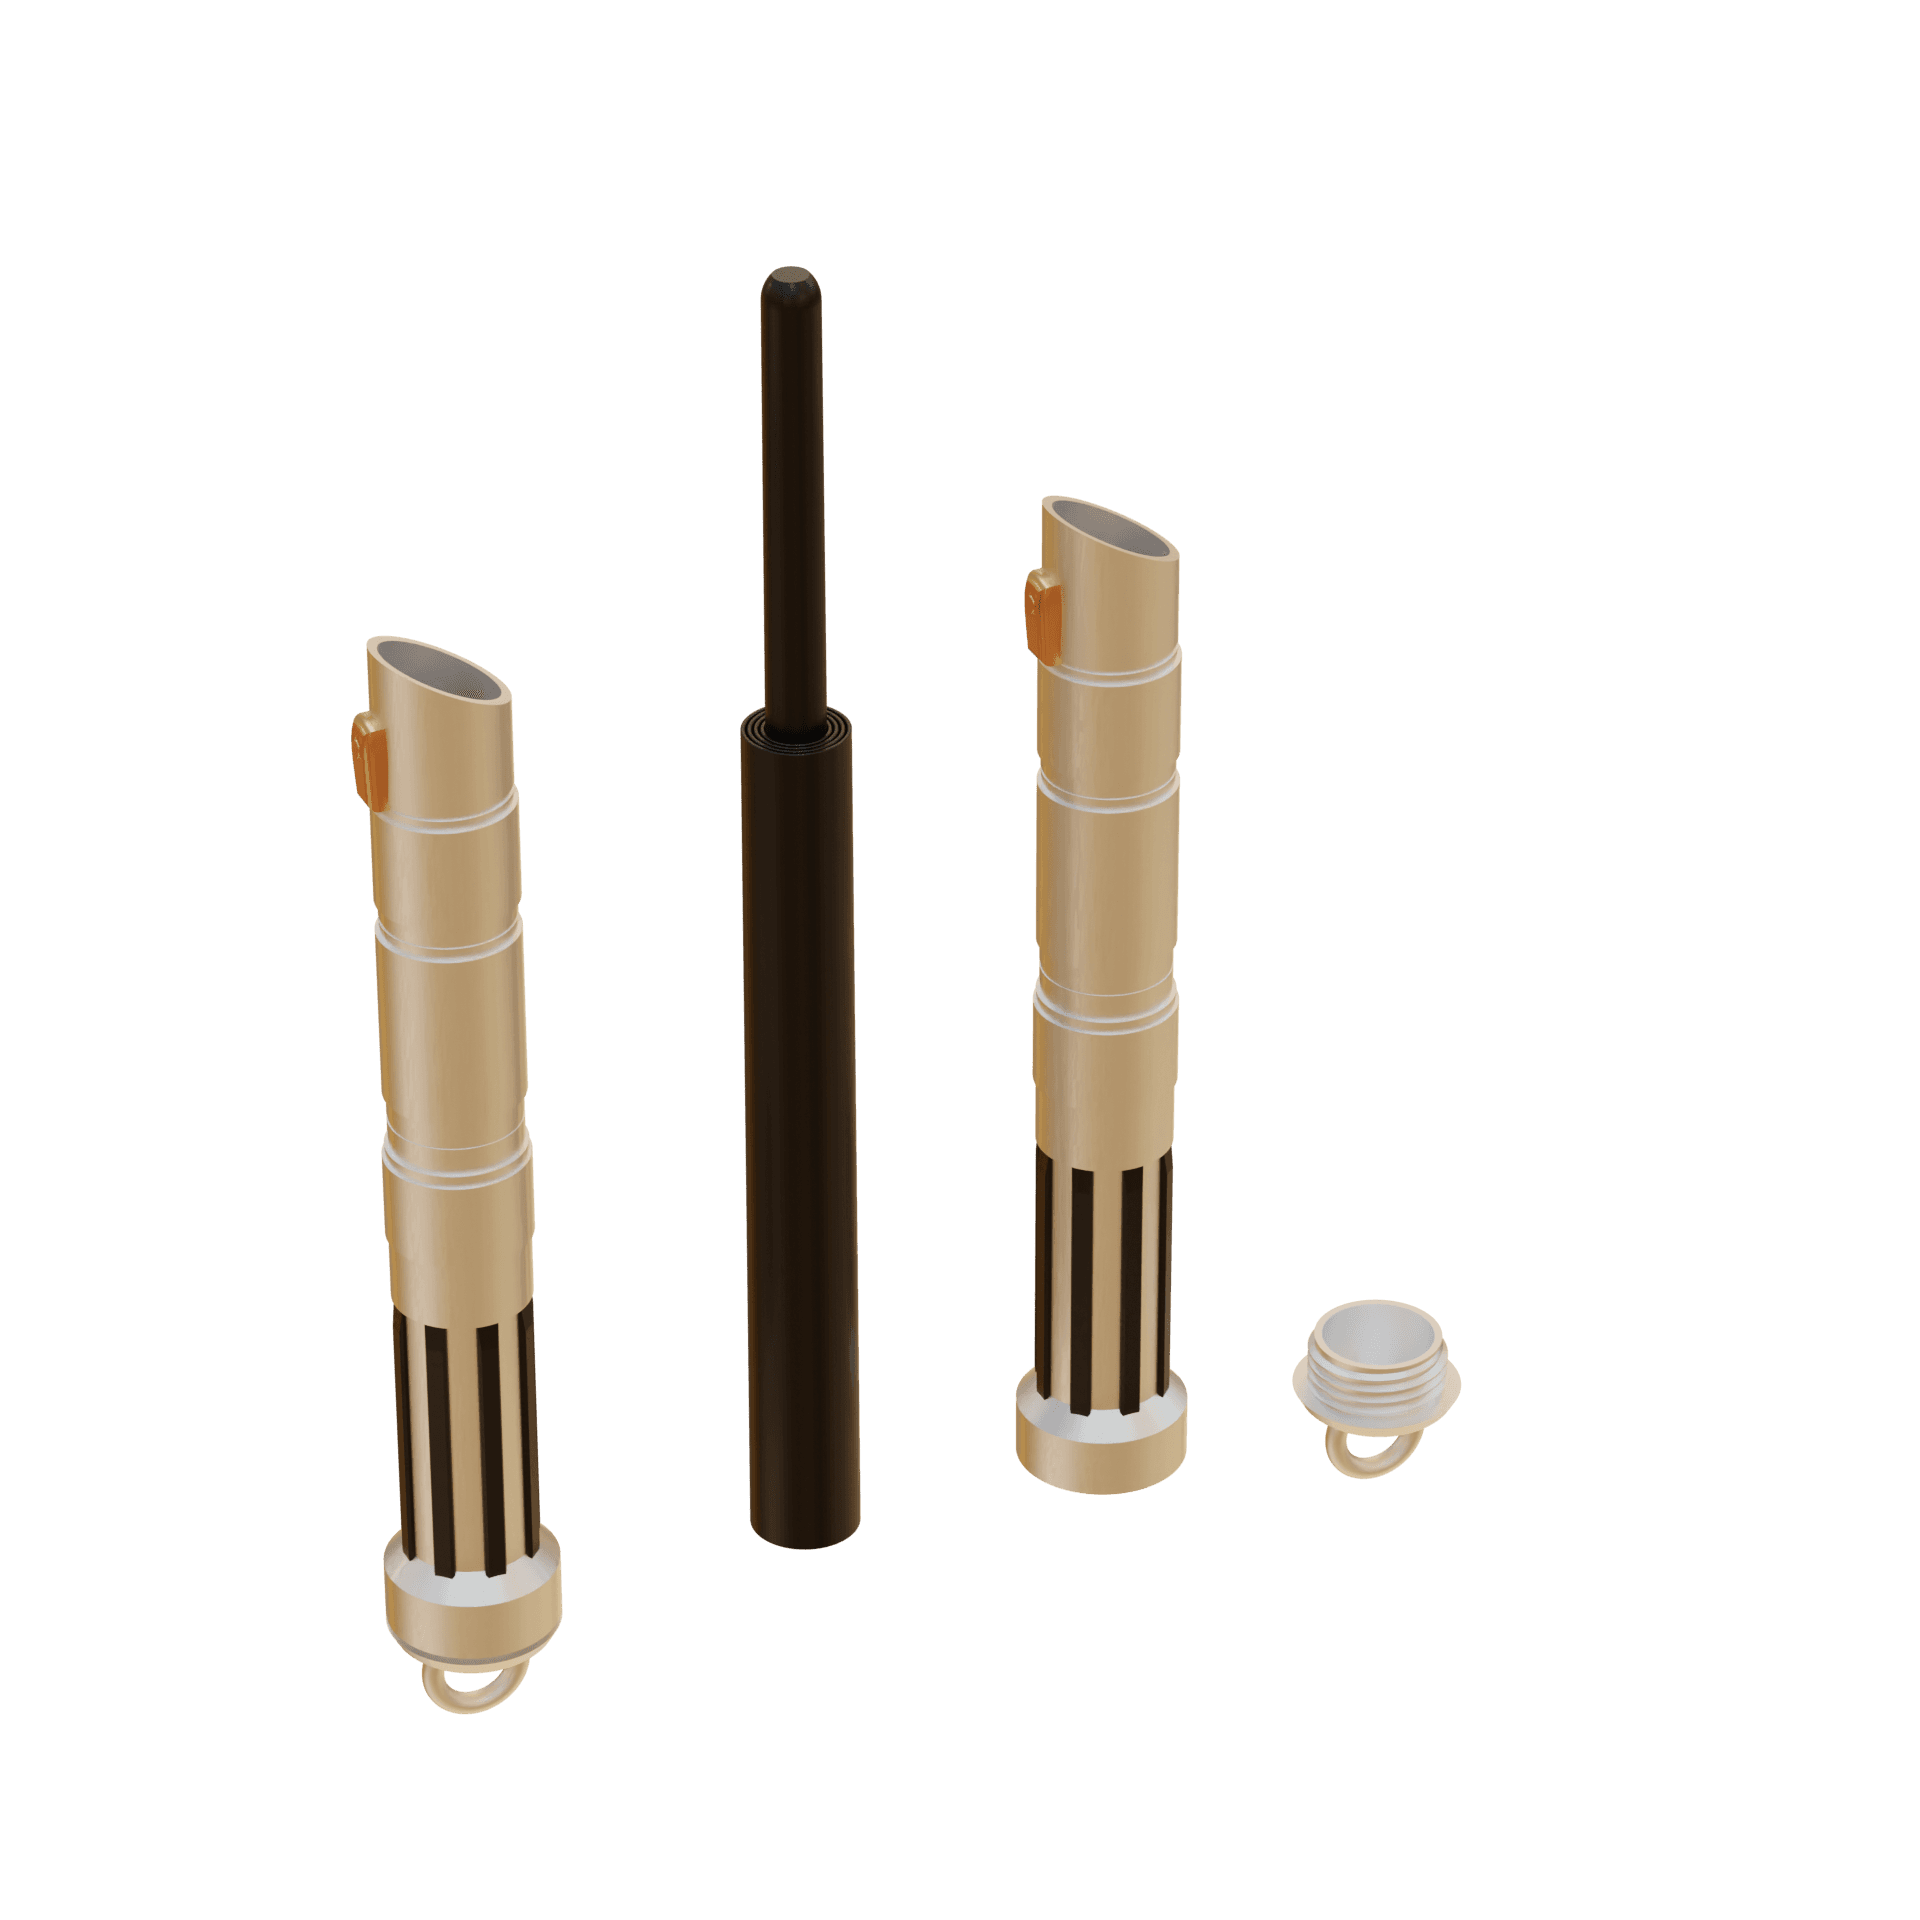 Print in Place Collapsing Jedi Lightsaber Concept 13 3d model